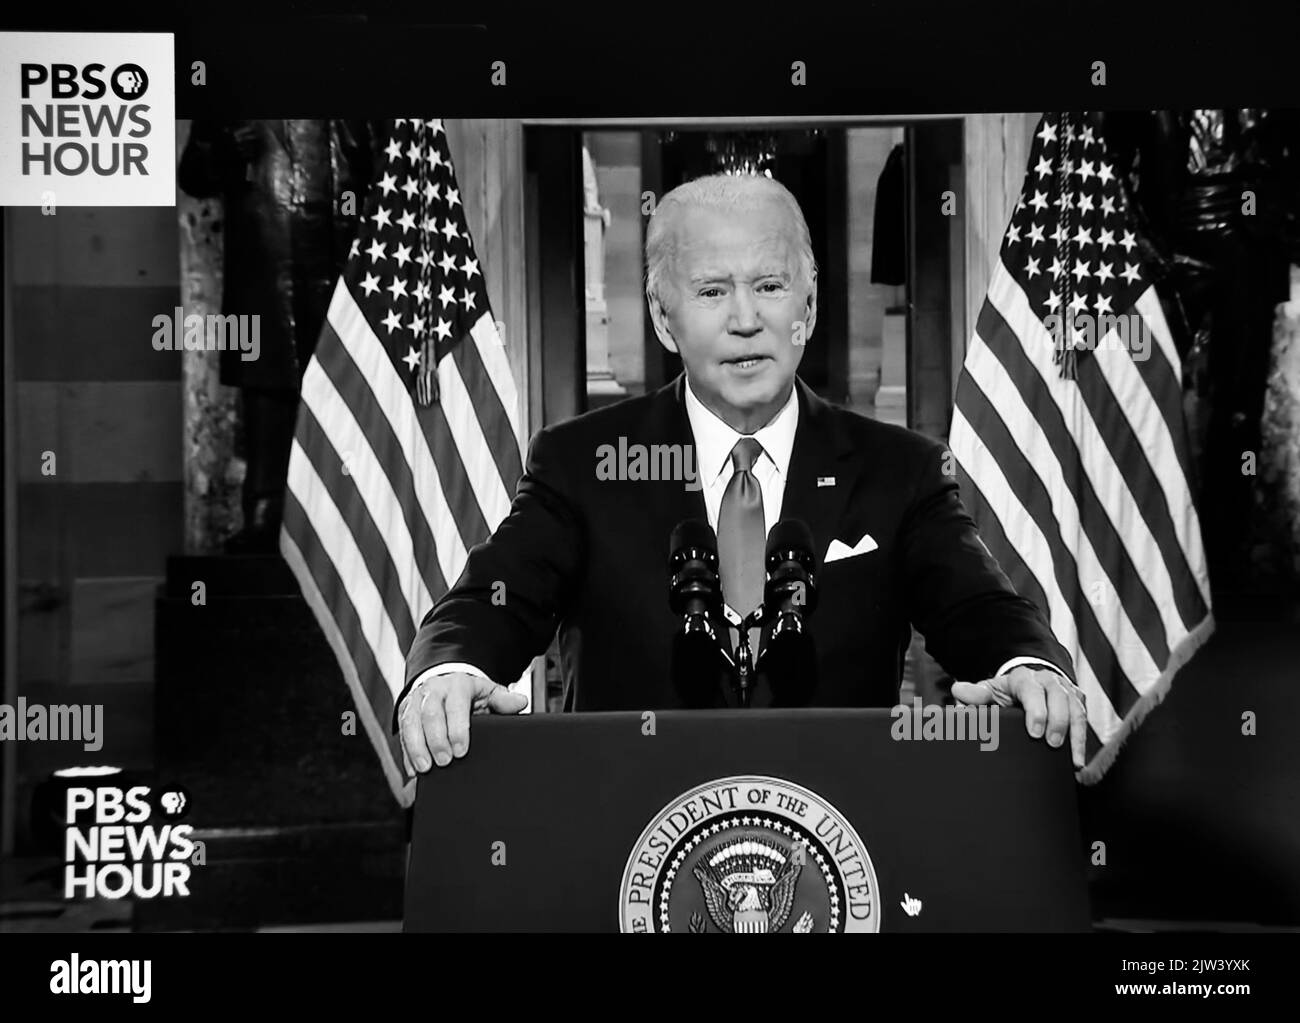 A PBS TV NewsHour screen shot of U.S. President Joe Biden speaking on the one-year anniversary of the January 6 attack on the U.S. Capitol. Stock Photo